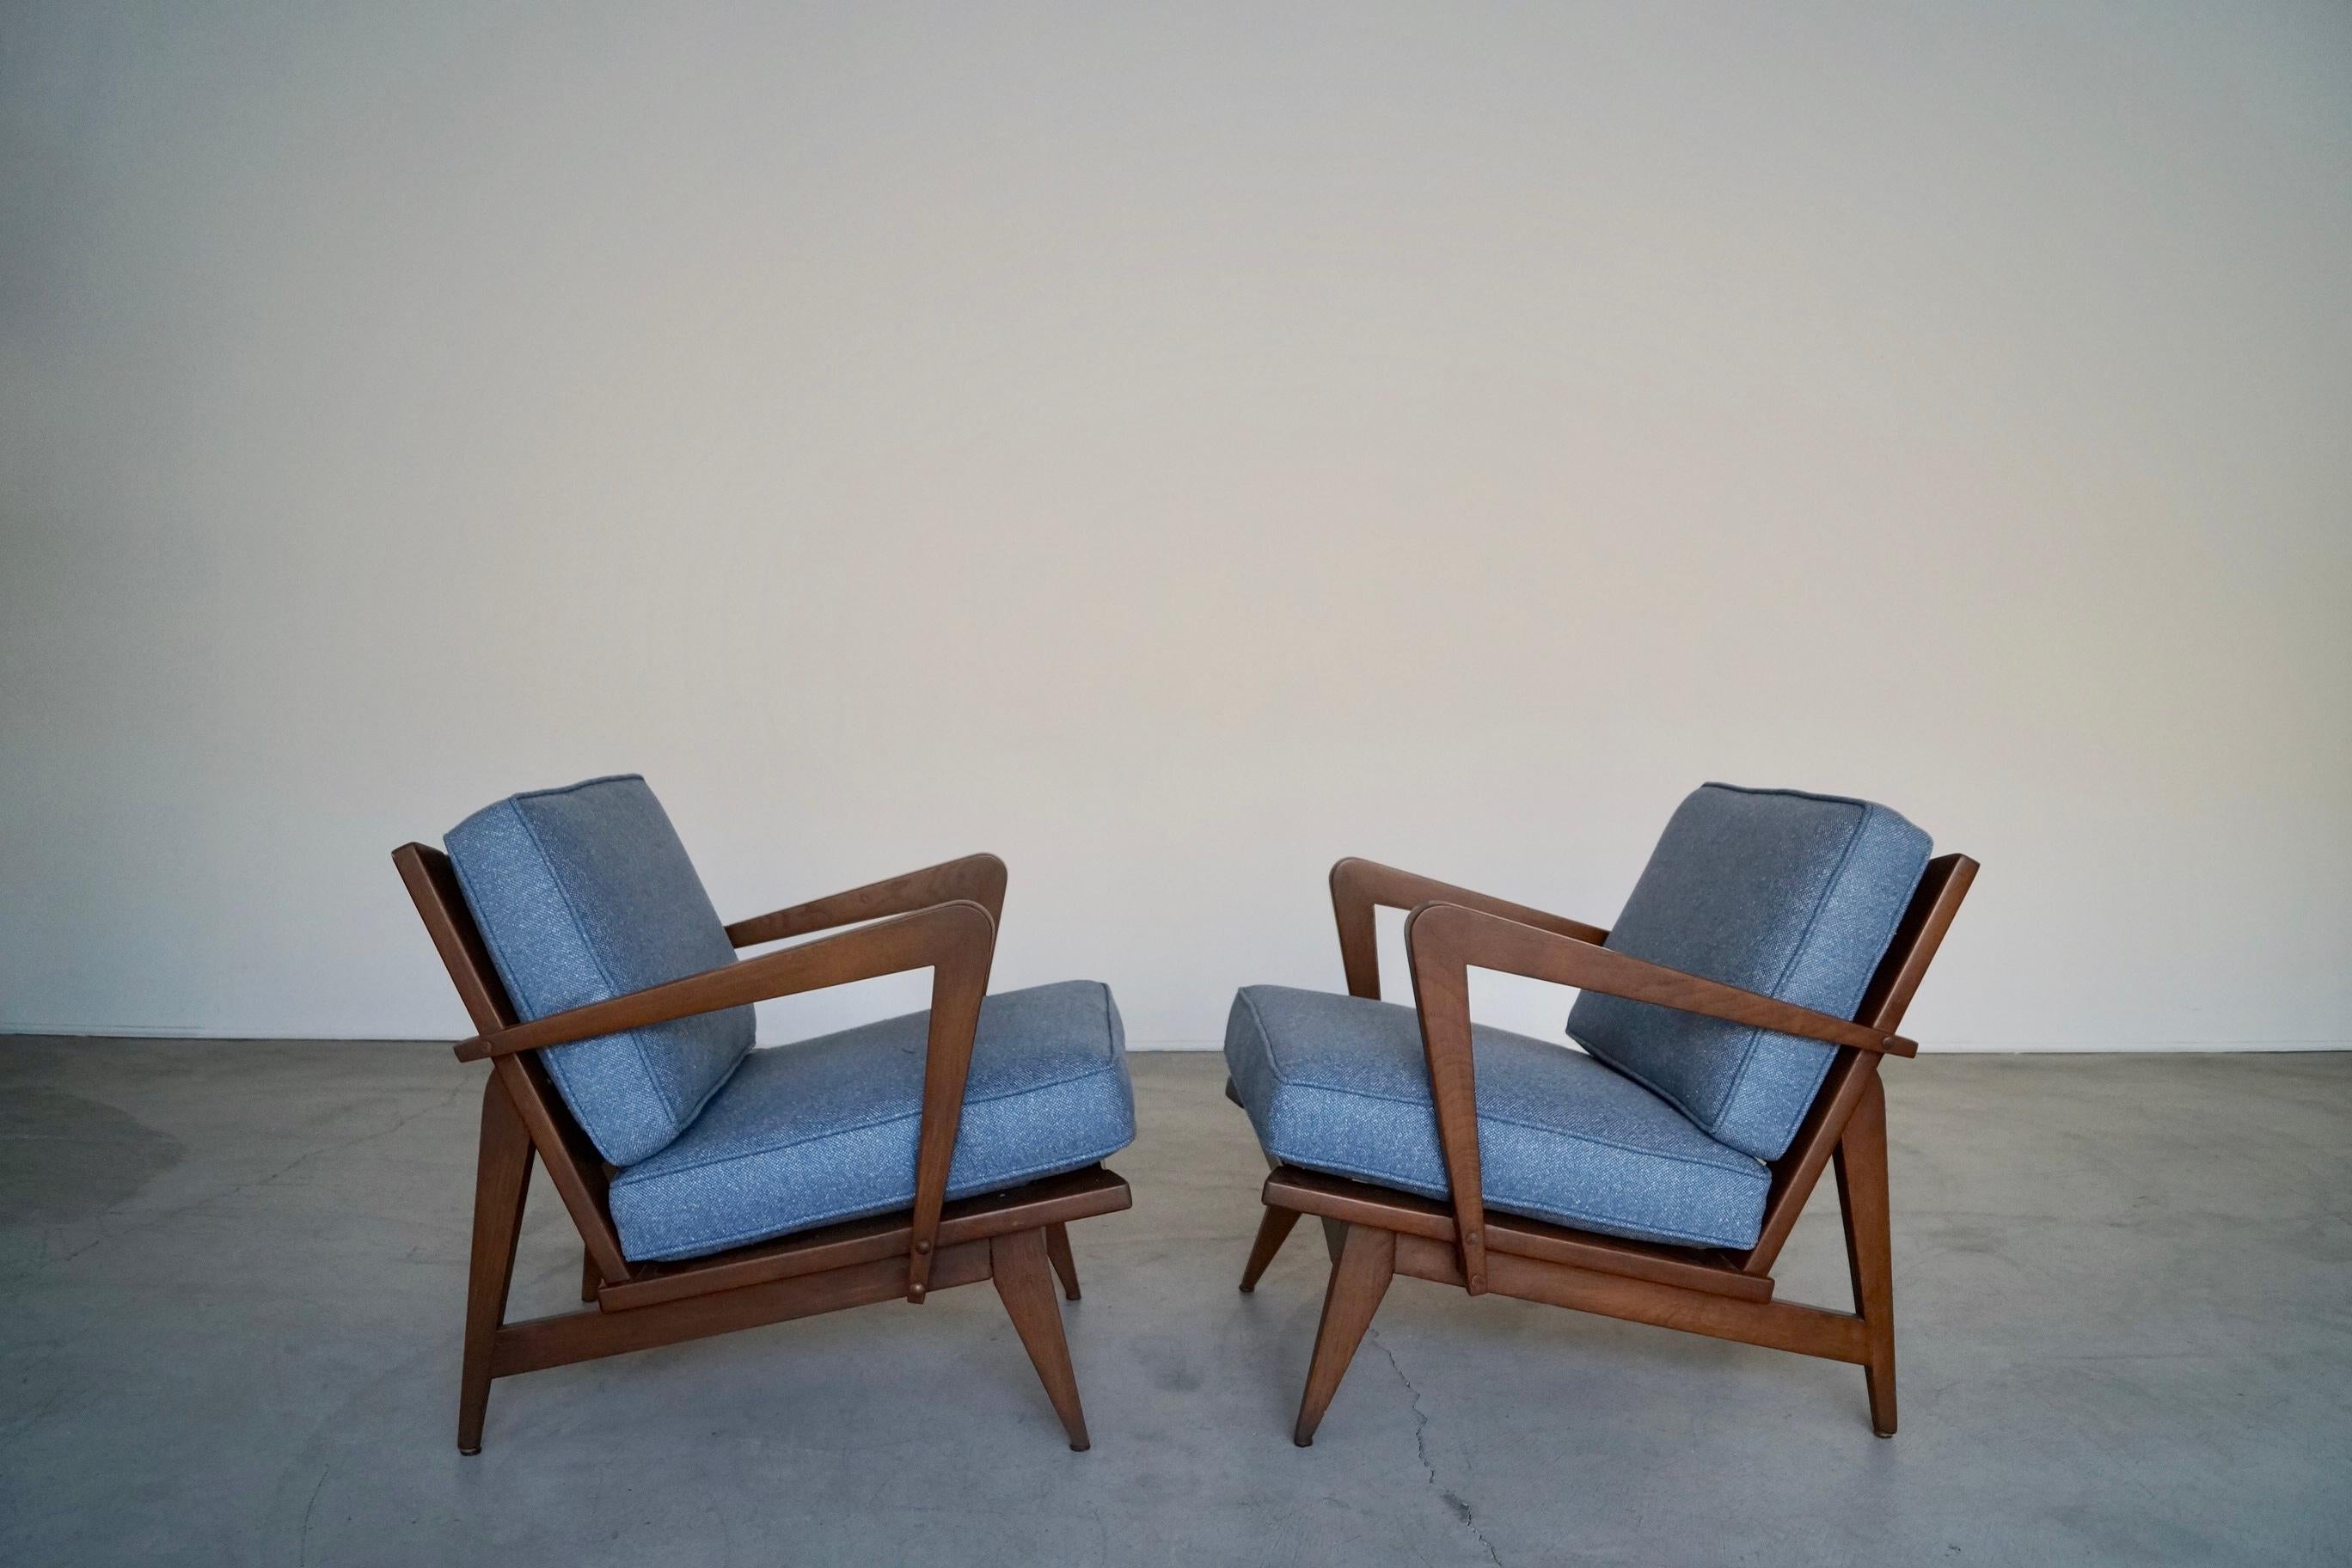 1950's Mid-Century Modern Lounge Chairs - a Pair 5